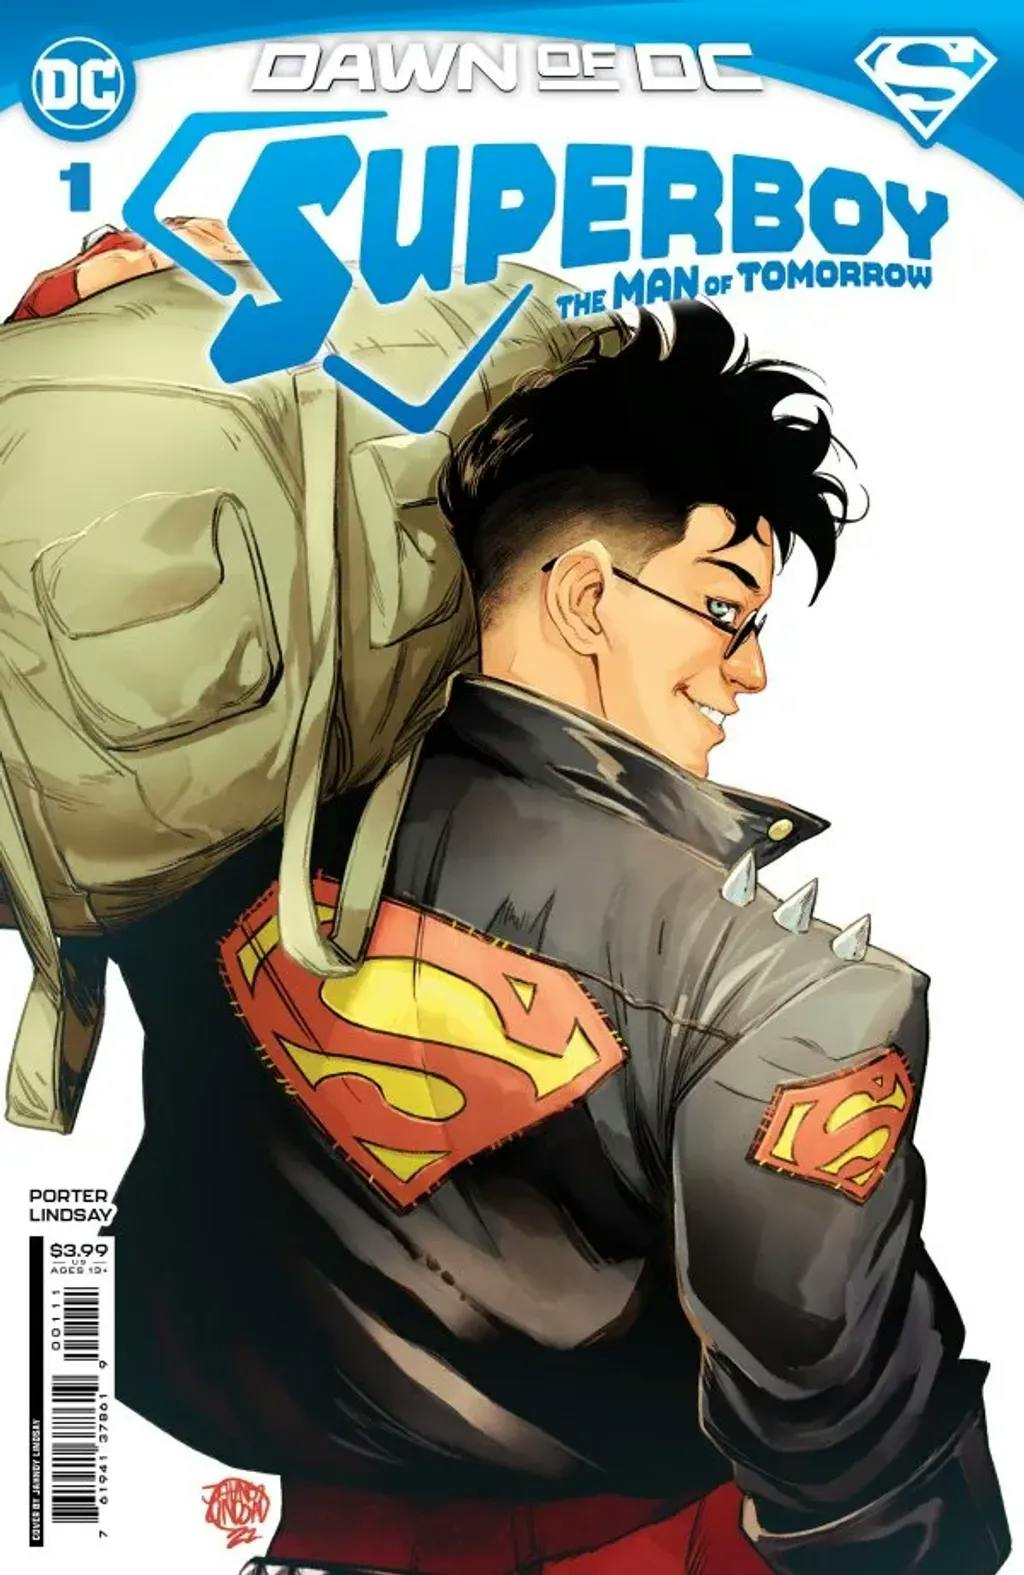 Superboy: The Man of Tomorrow #1 By Kenny Porter and Jahnoy Lindsay